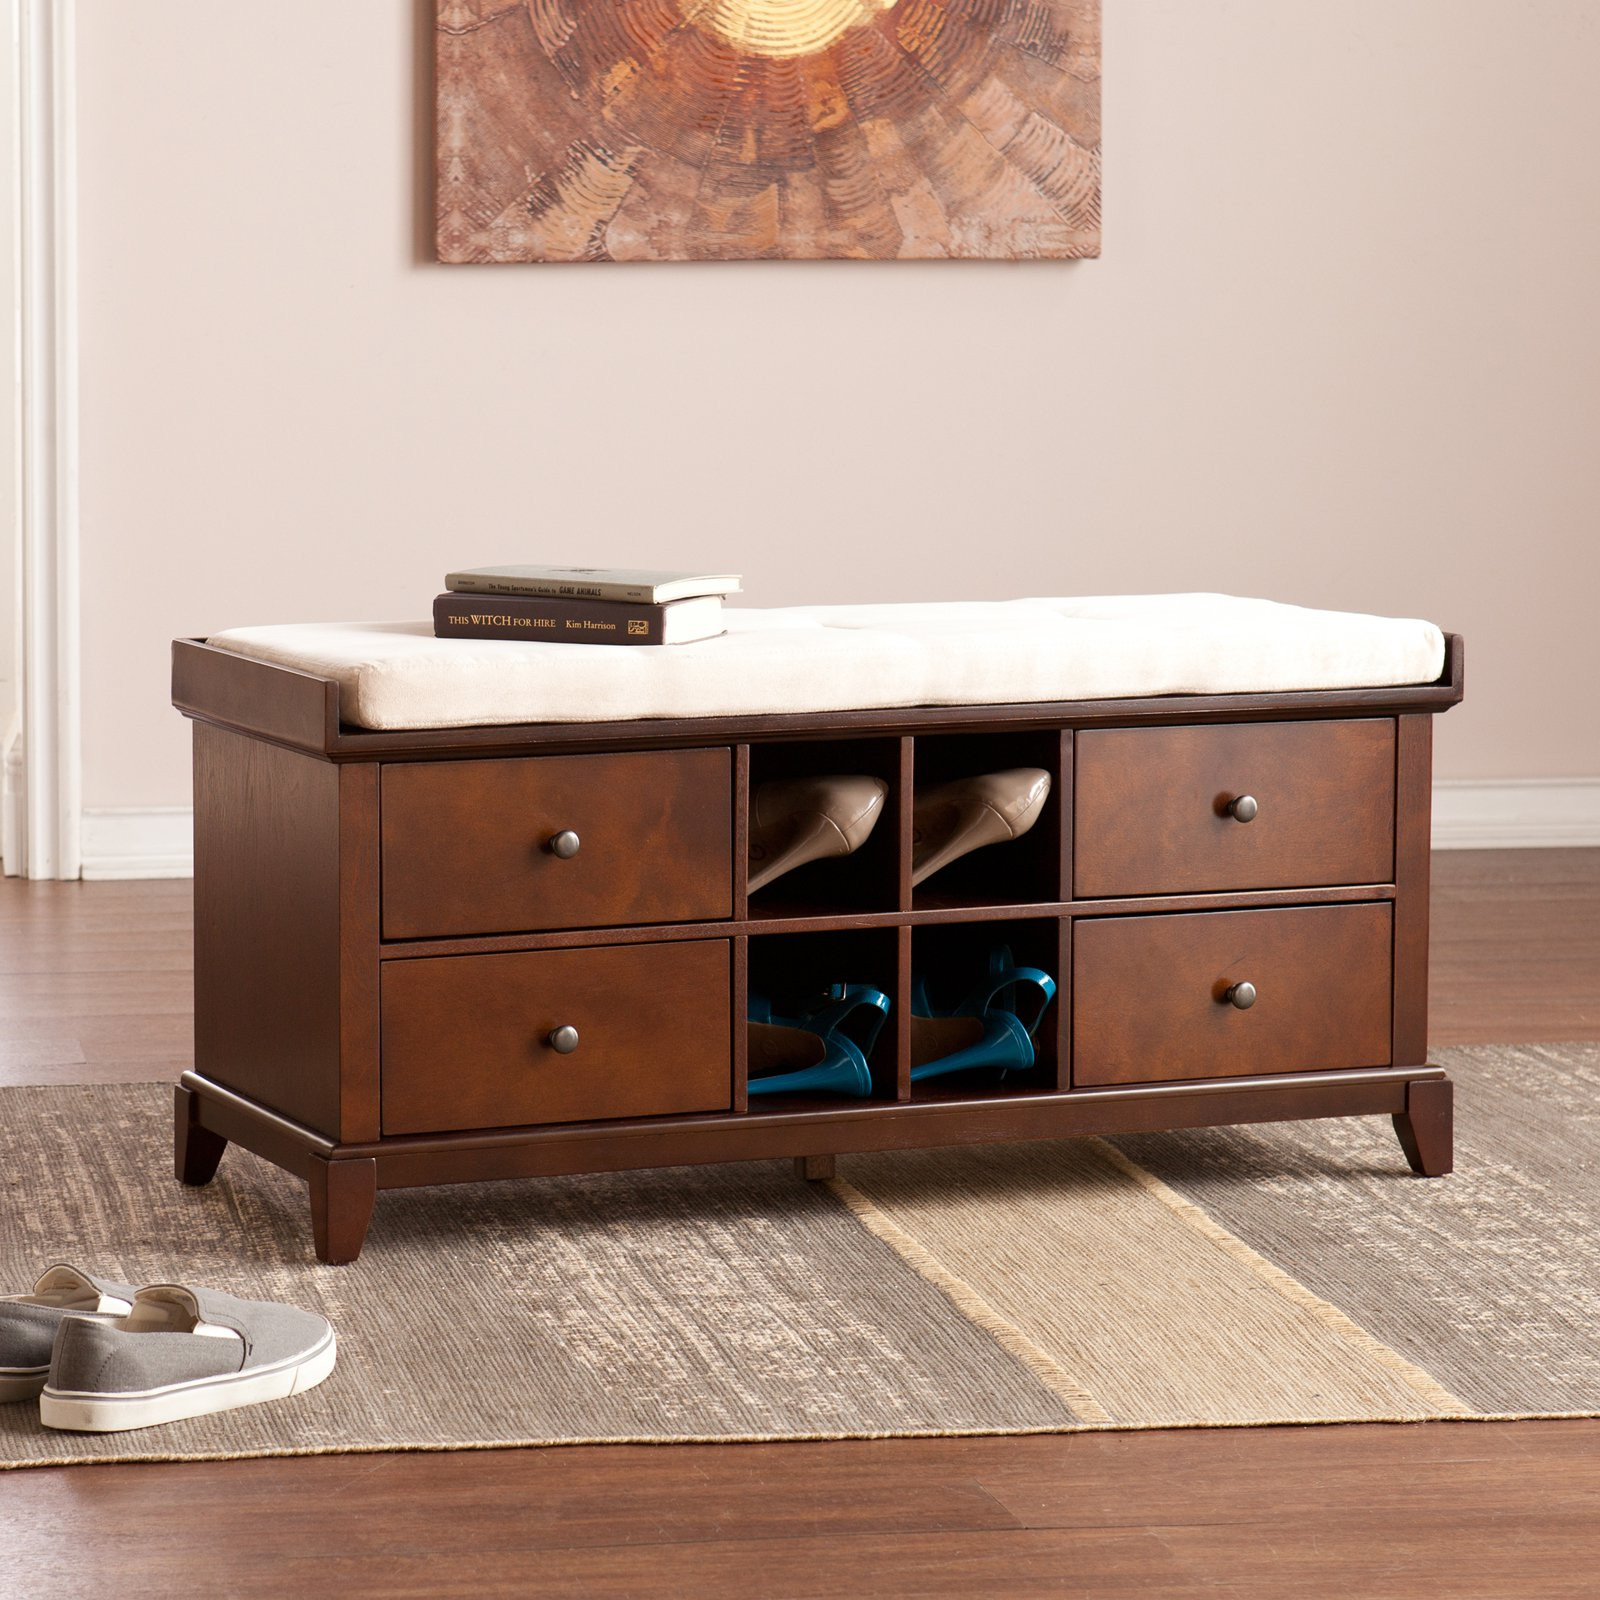 Storage Bench With Cushion
 Southern Enterprises Hulen Shoe Storage Bench with Cushion